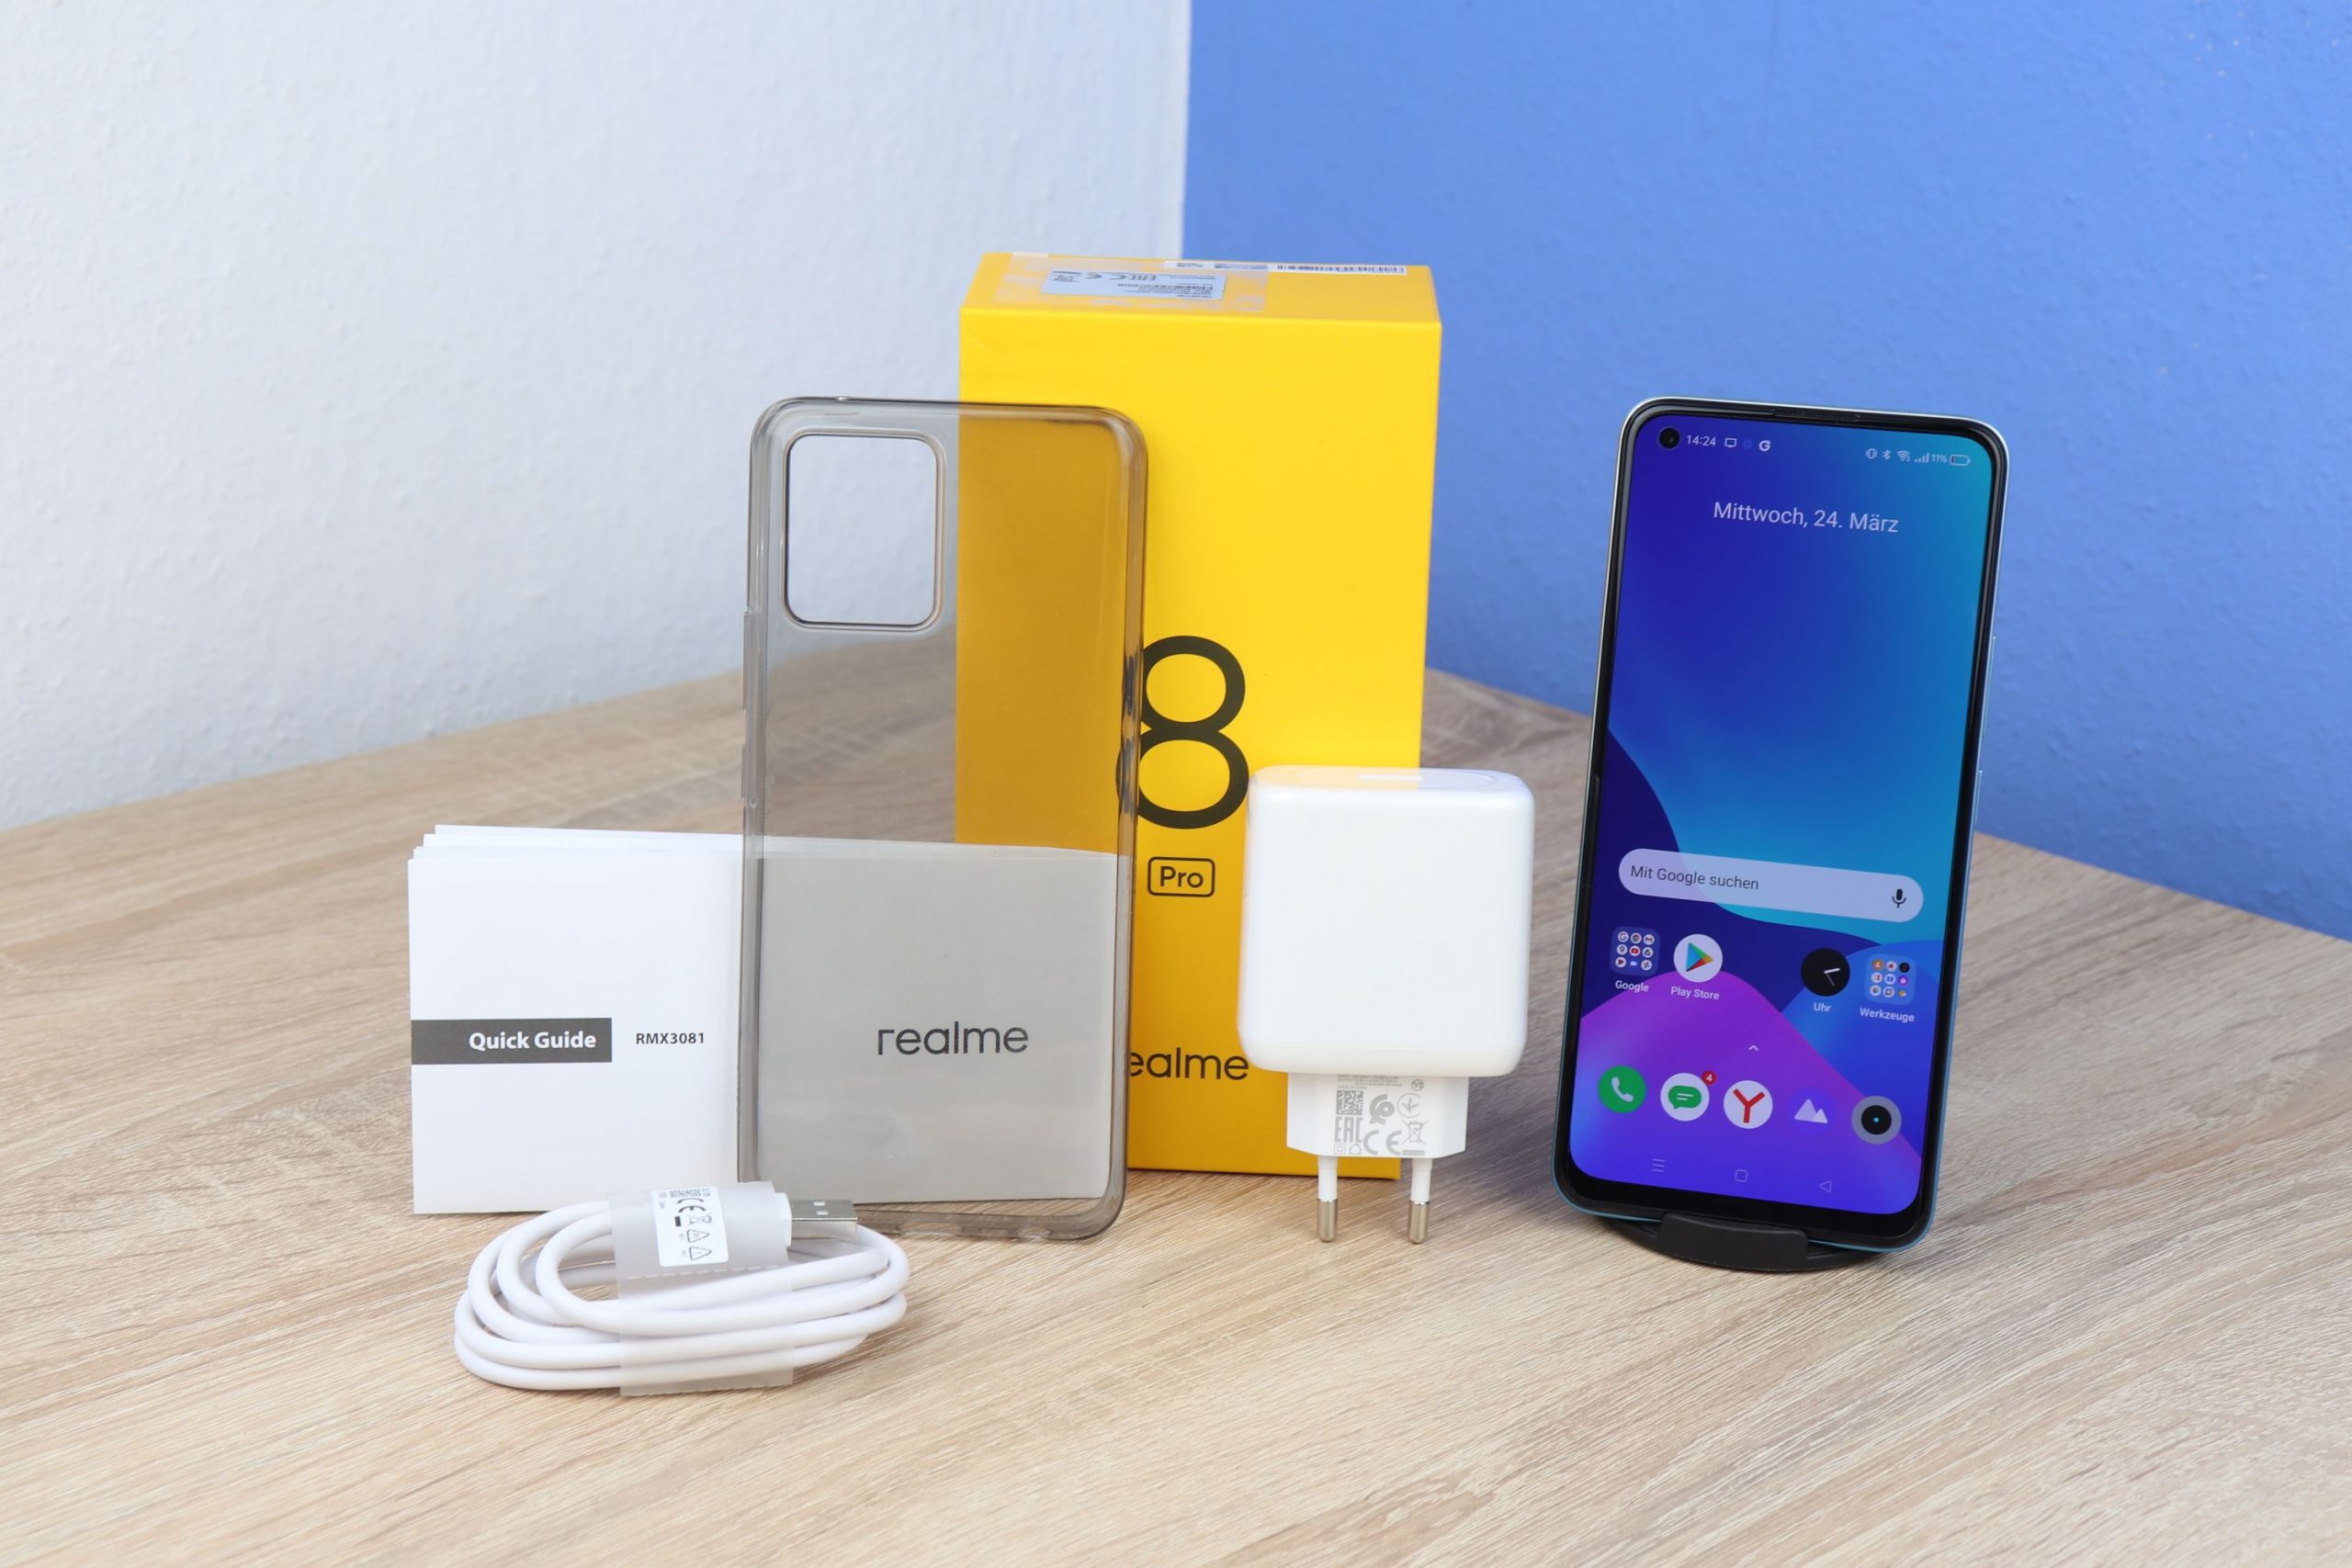 Realme 8 Pro – made the first impression of the Redmi competitor